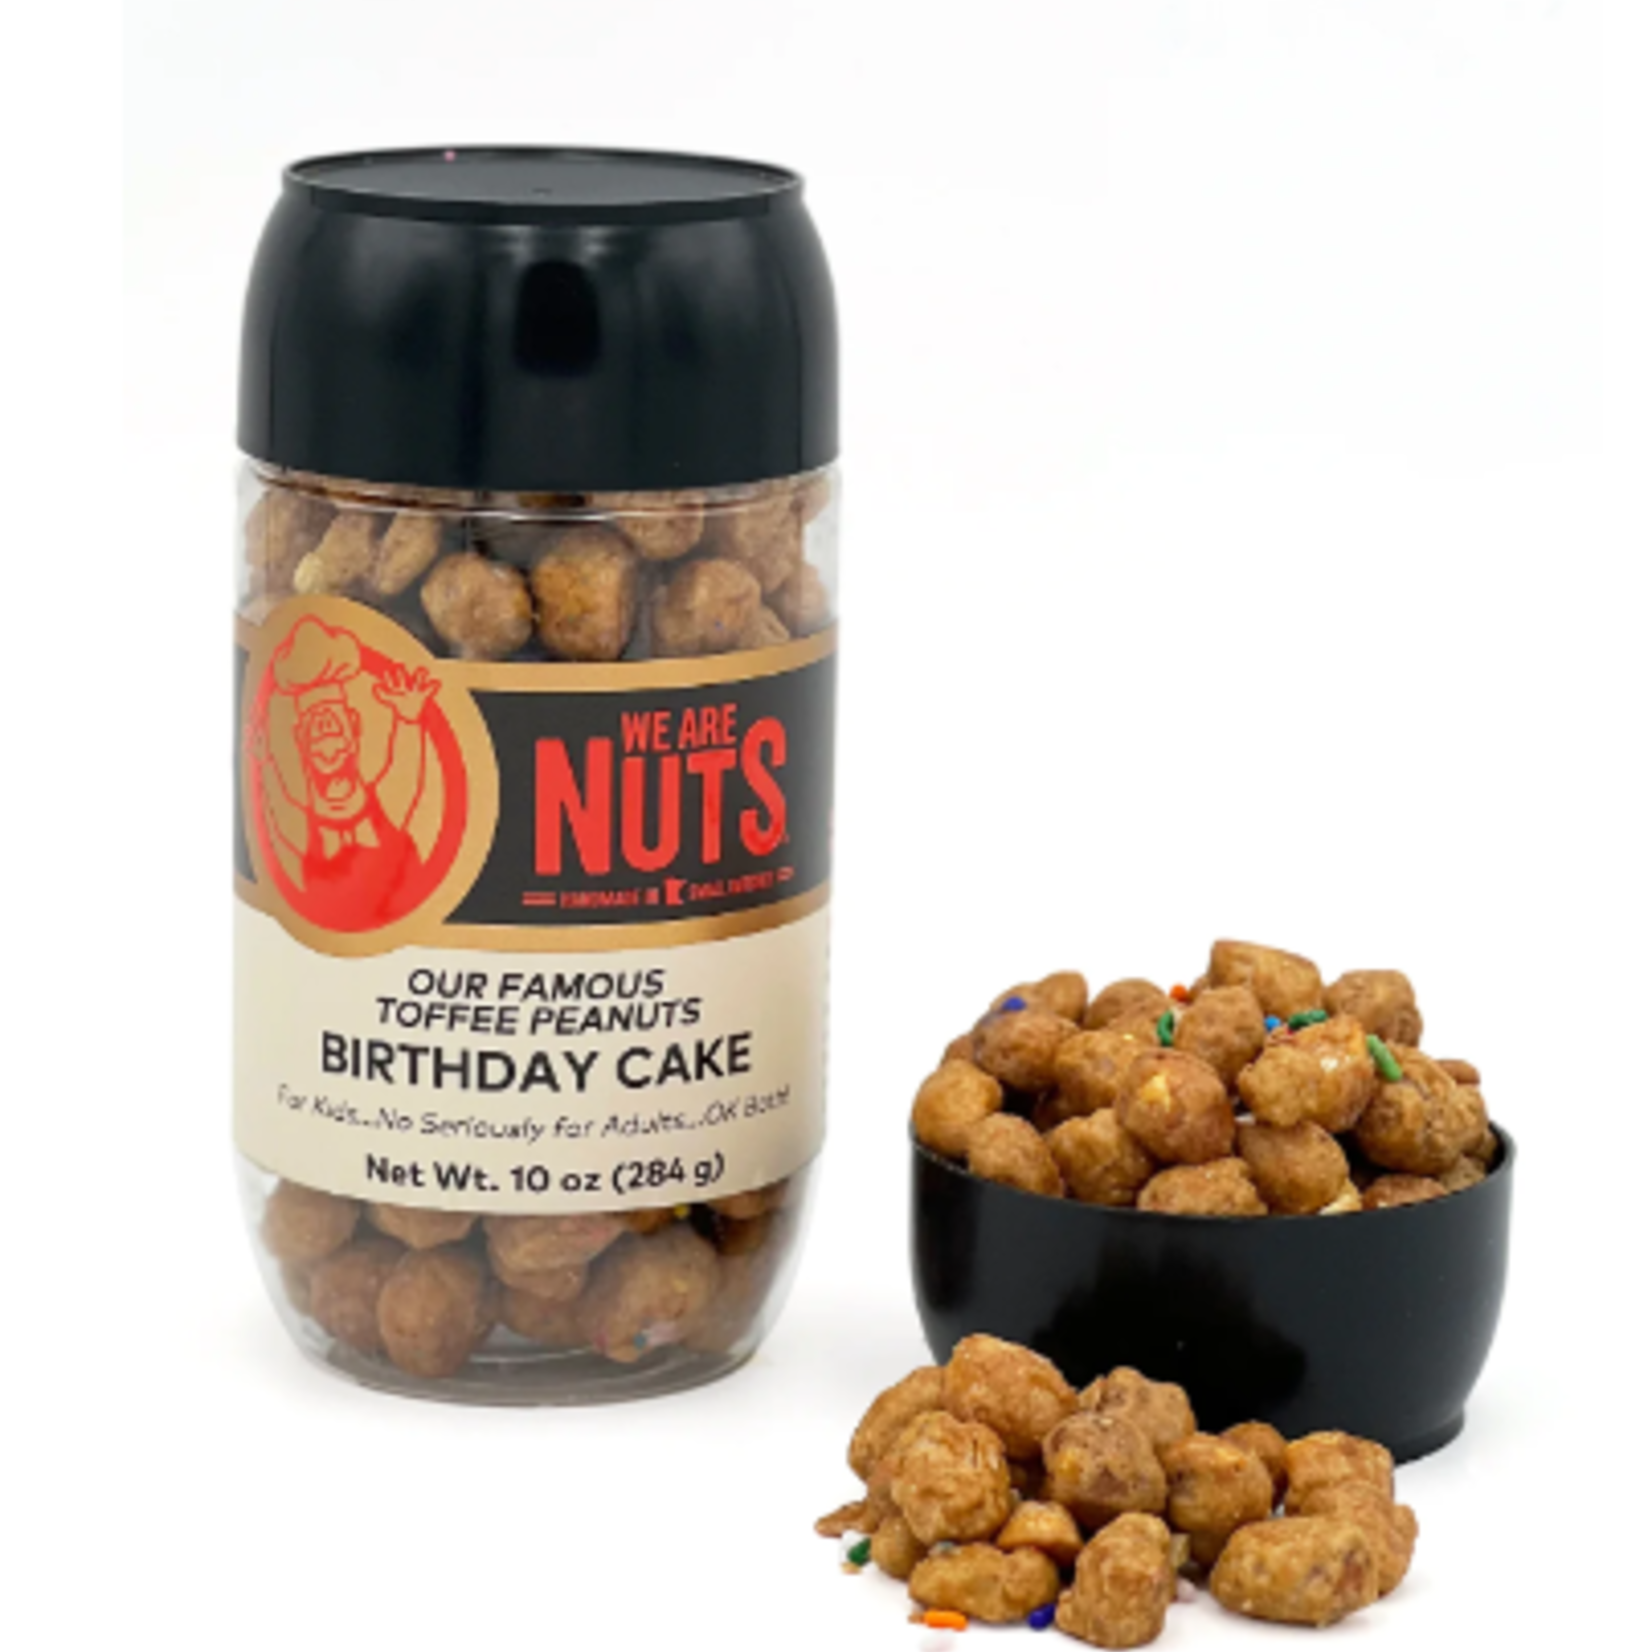 We Are Nuts We Are Nuts - Birthday Cake Toffee Peanuts, 10 Oz